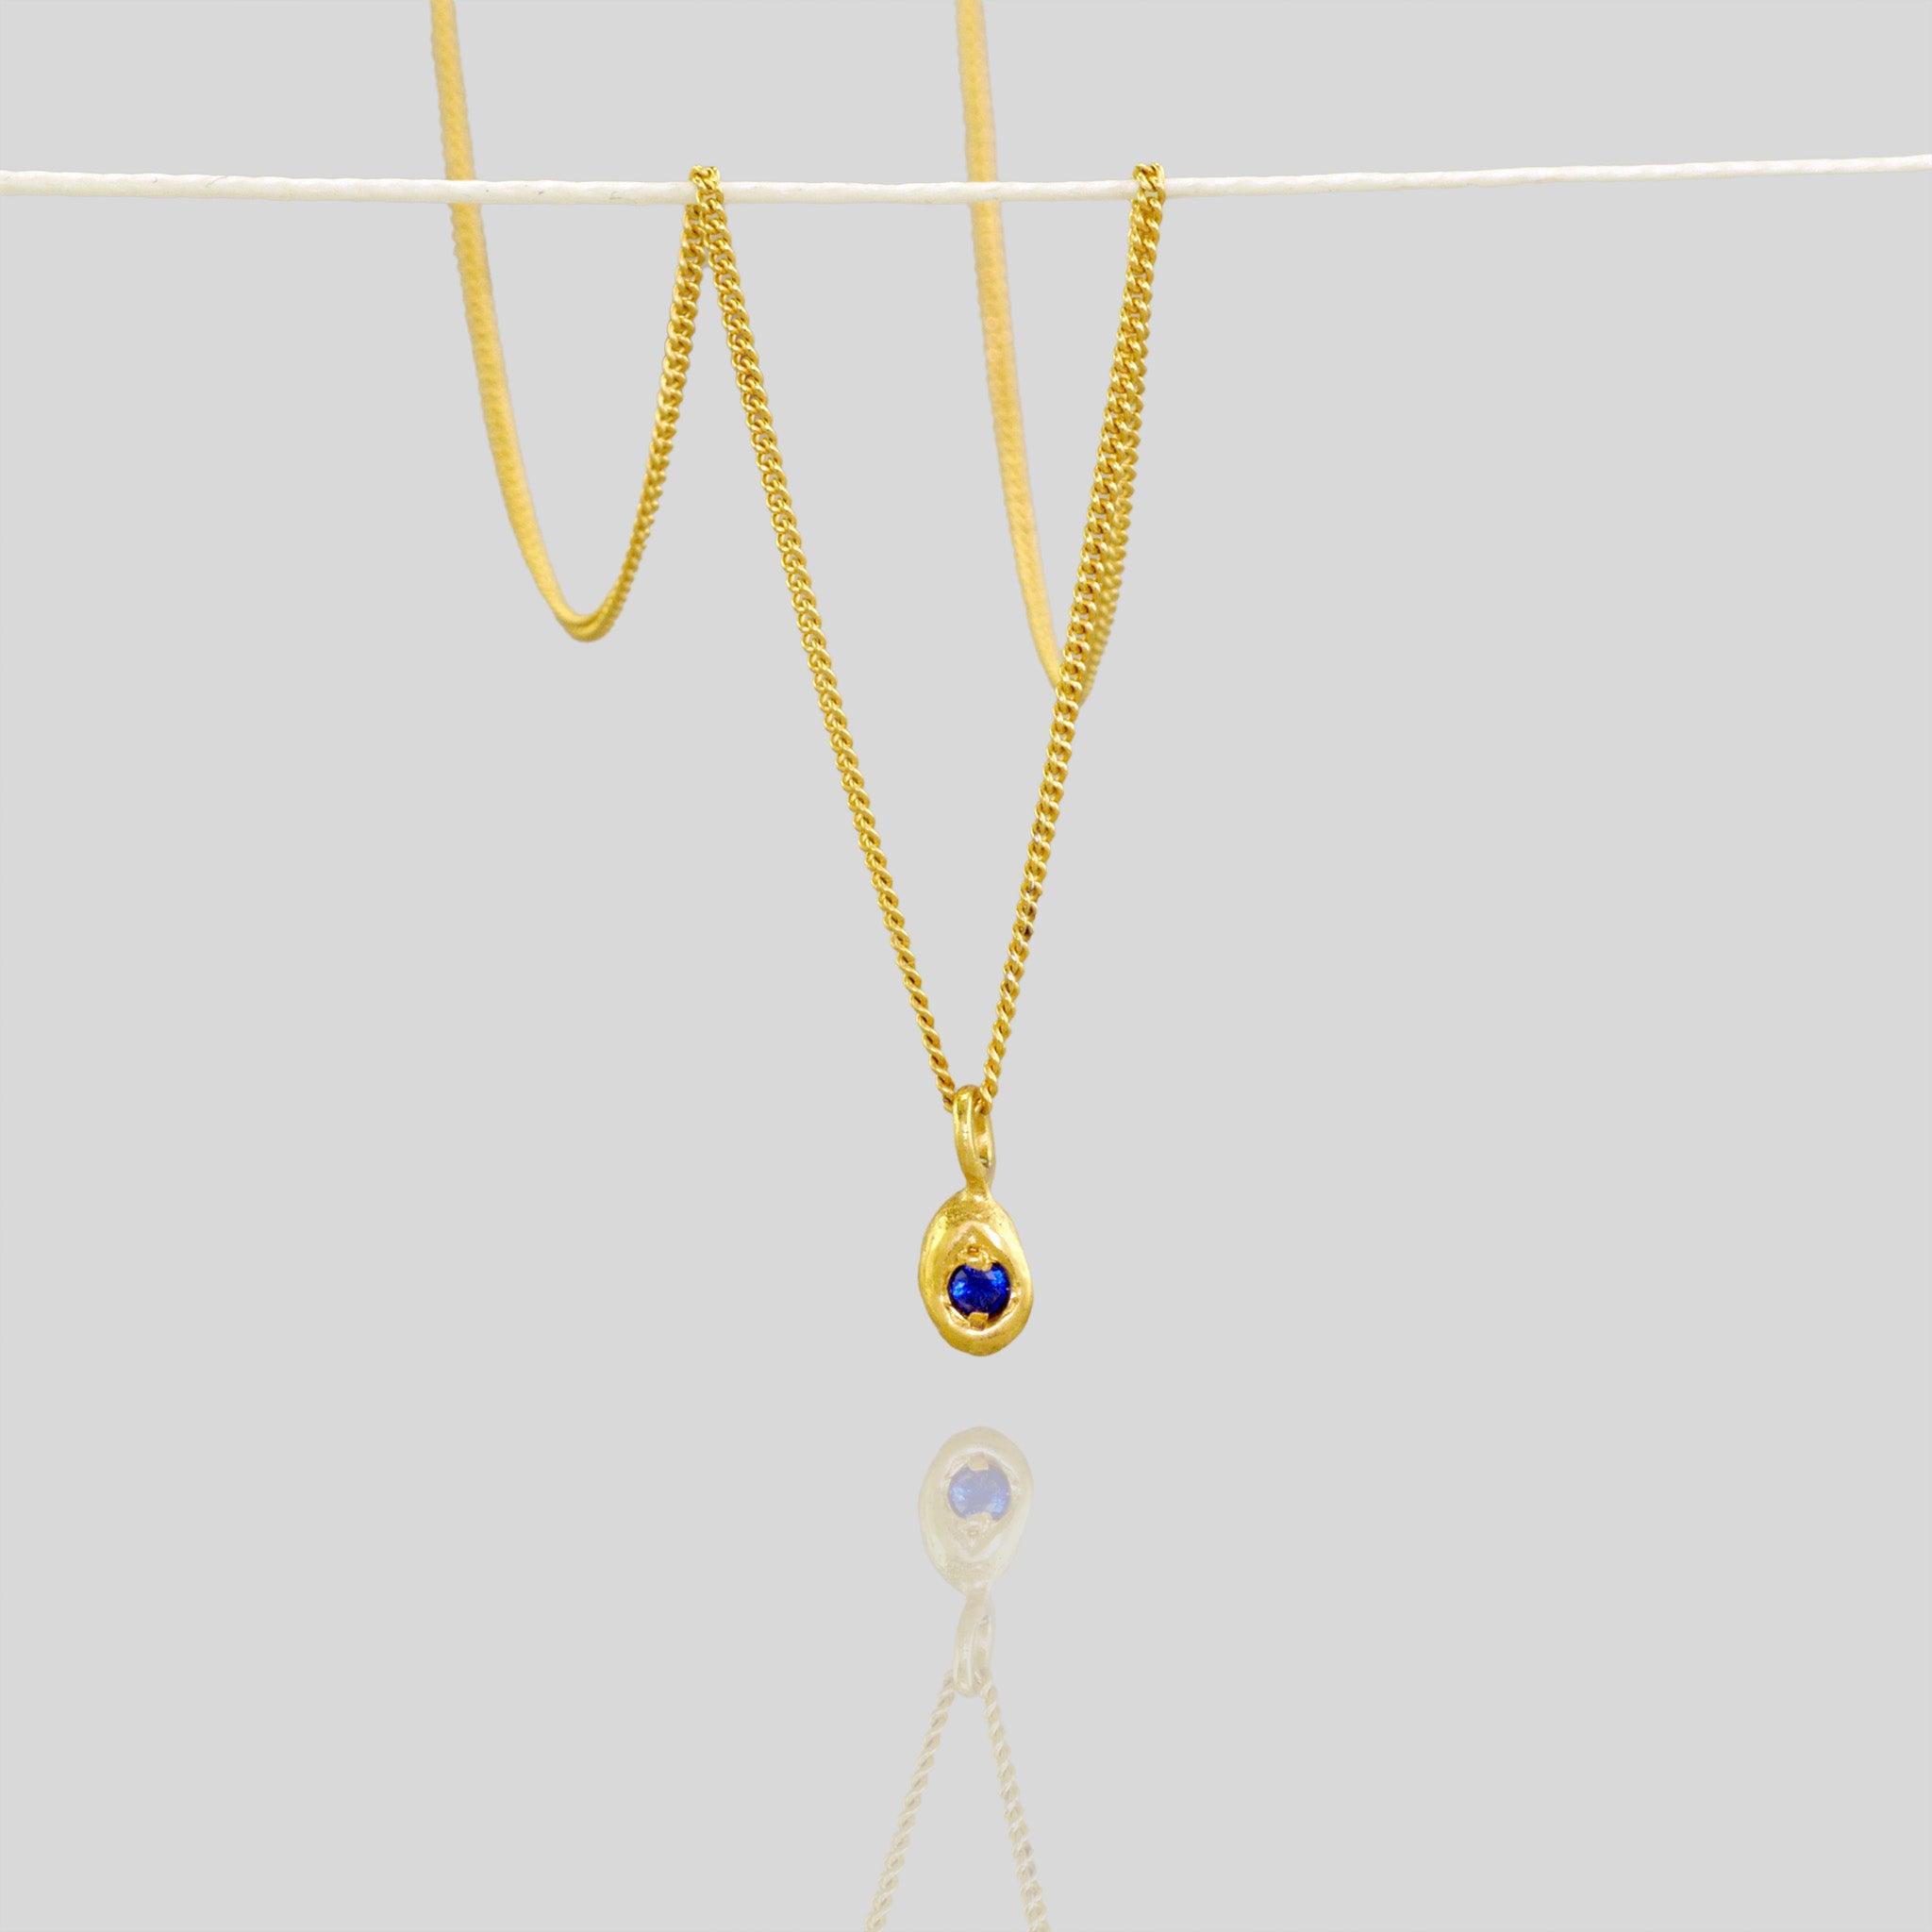 18k Yellow Gold Pendant with a drop shape and a central sapphire, designed to replicate a naturally gathered dried seed.